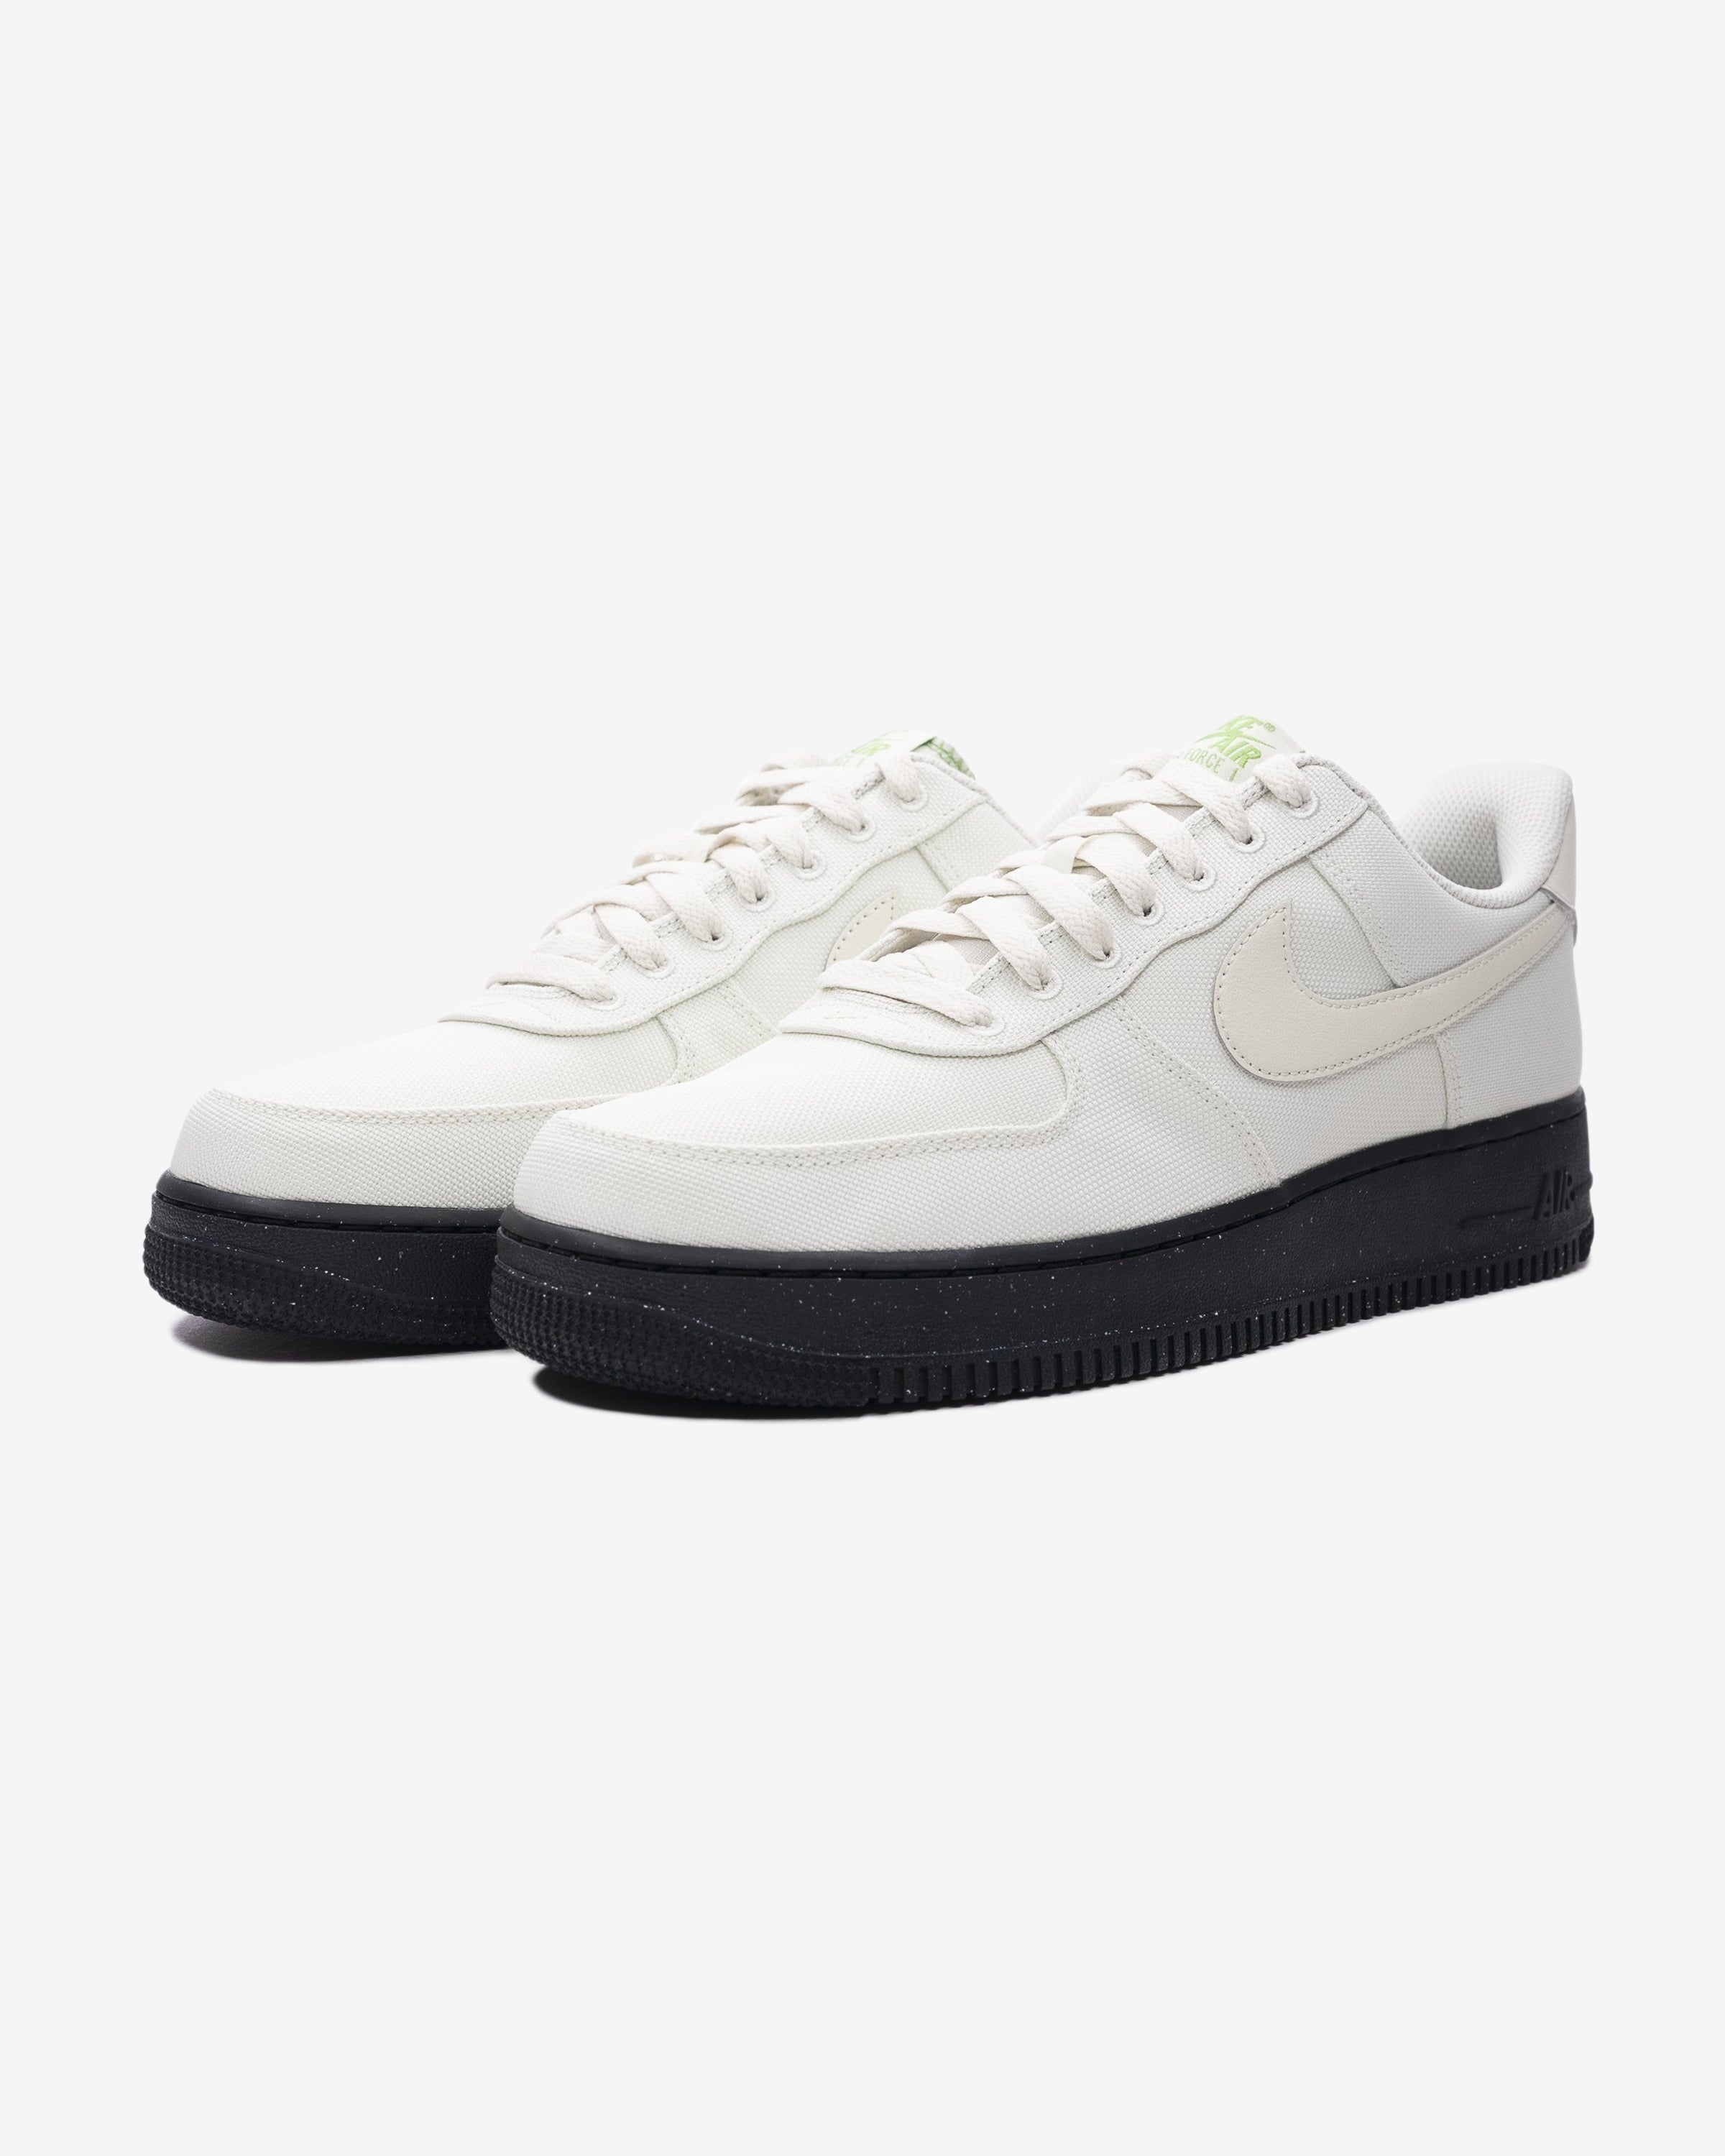 NIKE AIR FORCE 1 '07 LV8 – UNDEFEATED JAPAN